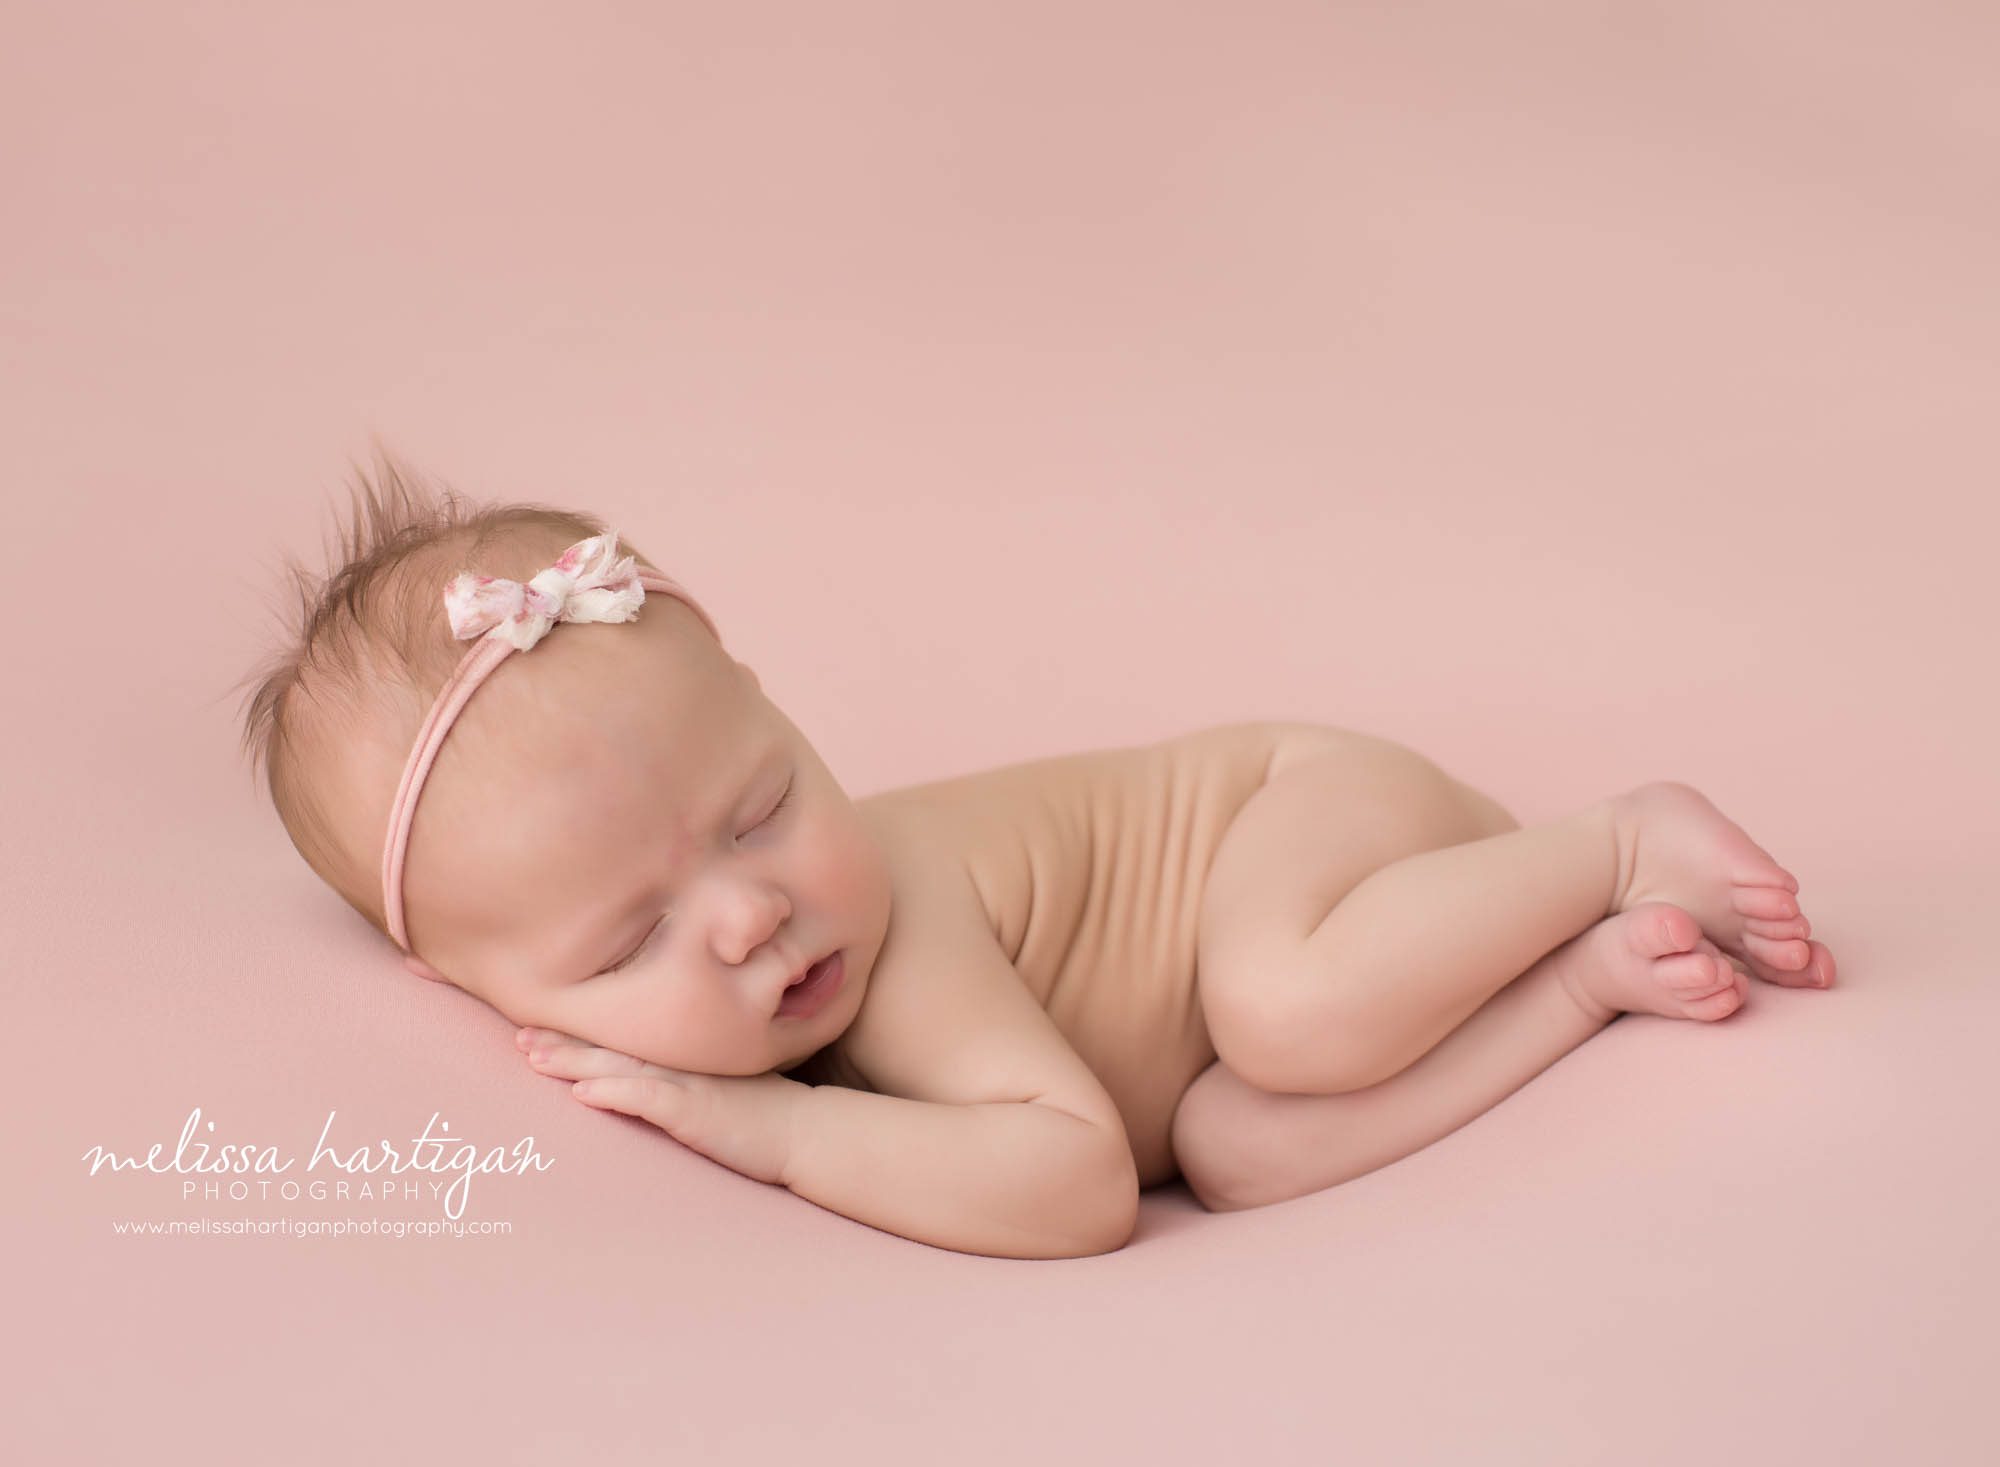 newborn baby girl posed on side on pink backdrop with bow headband